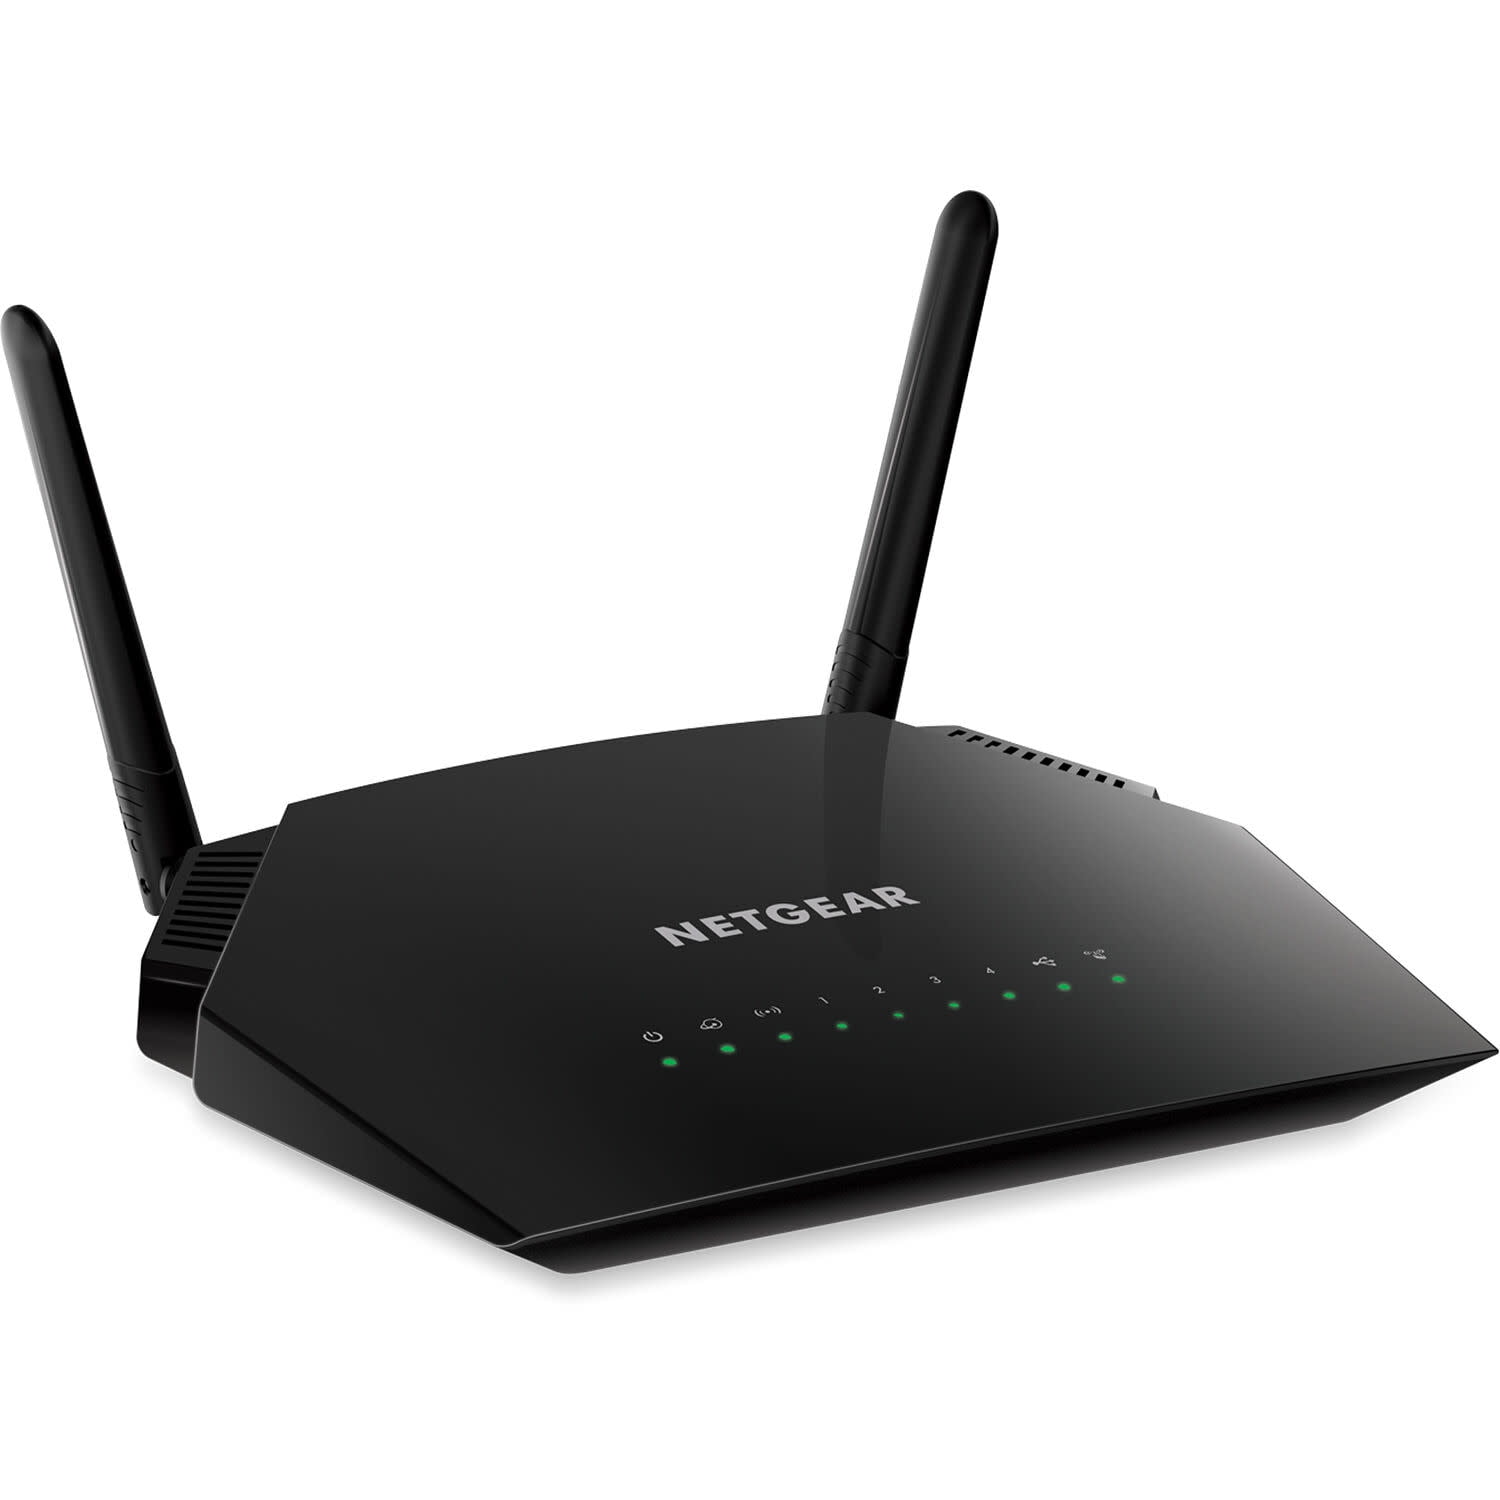 Router recommendations